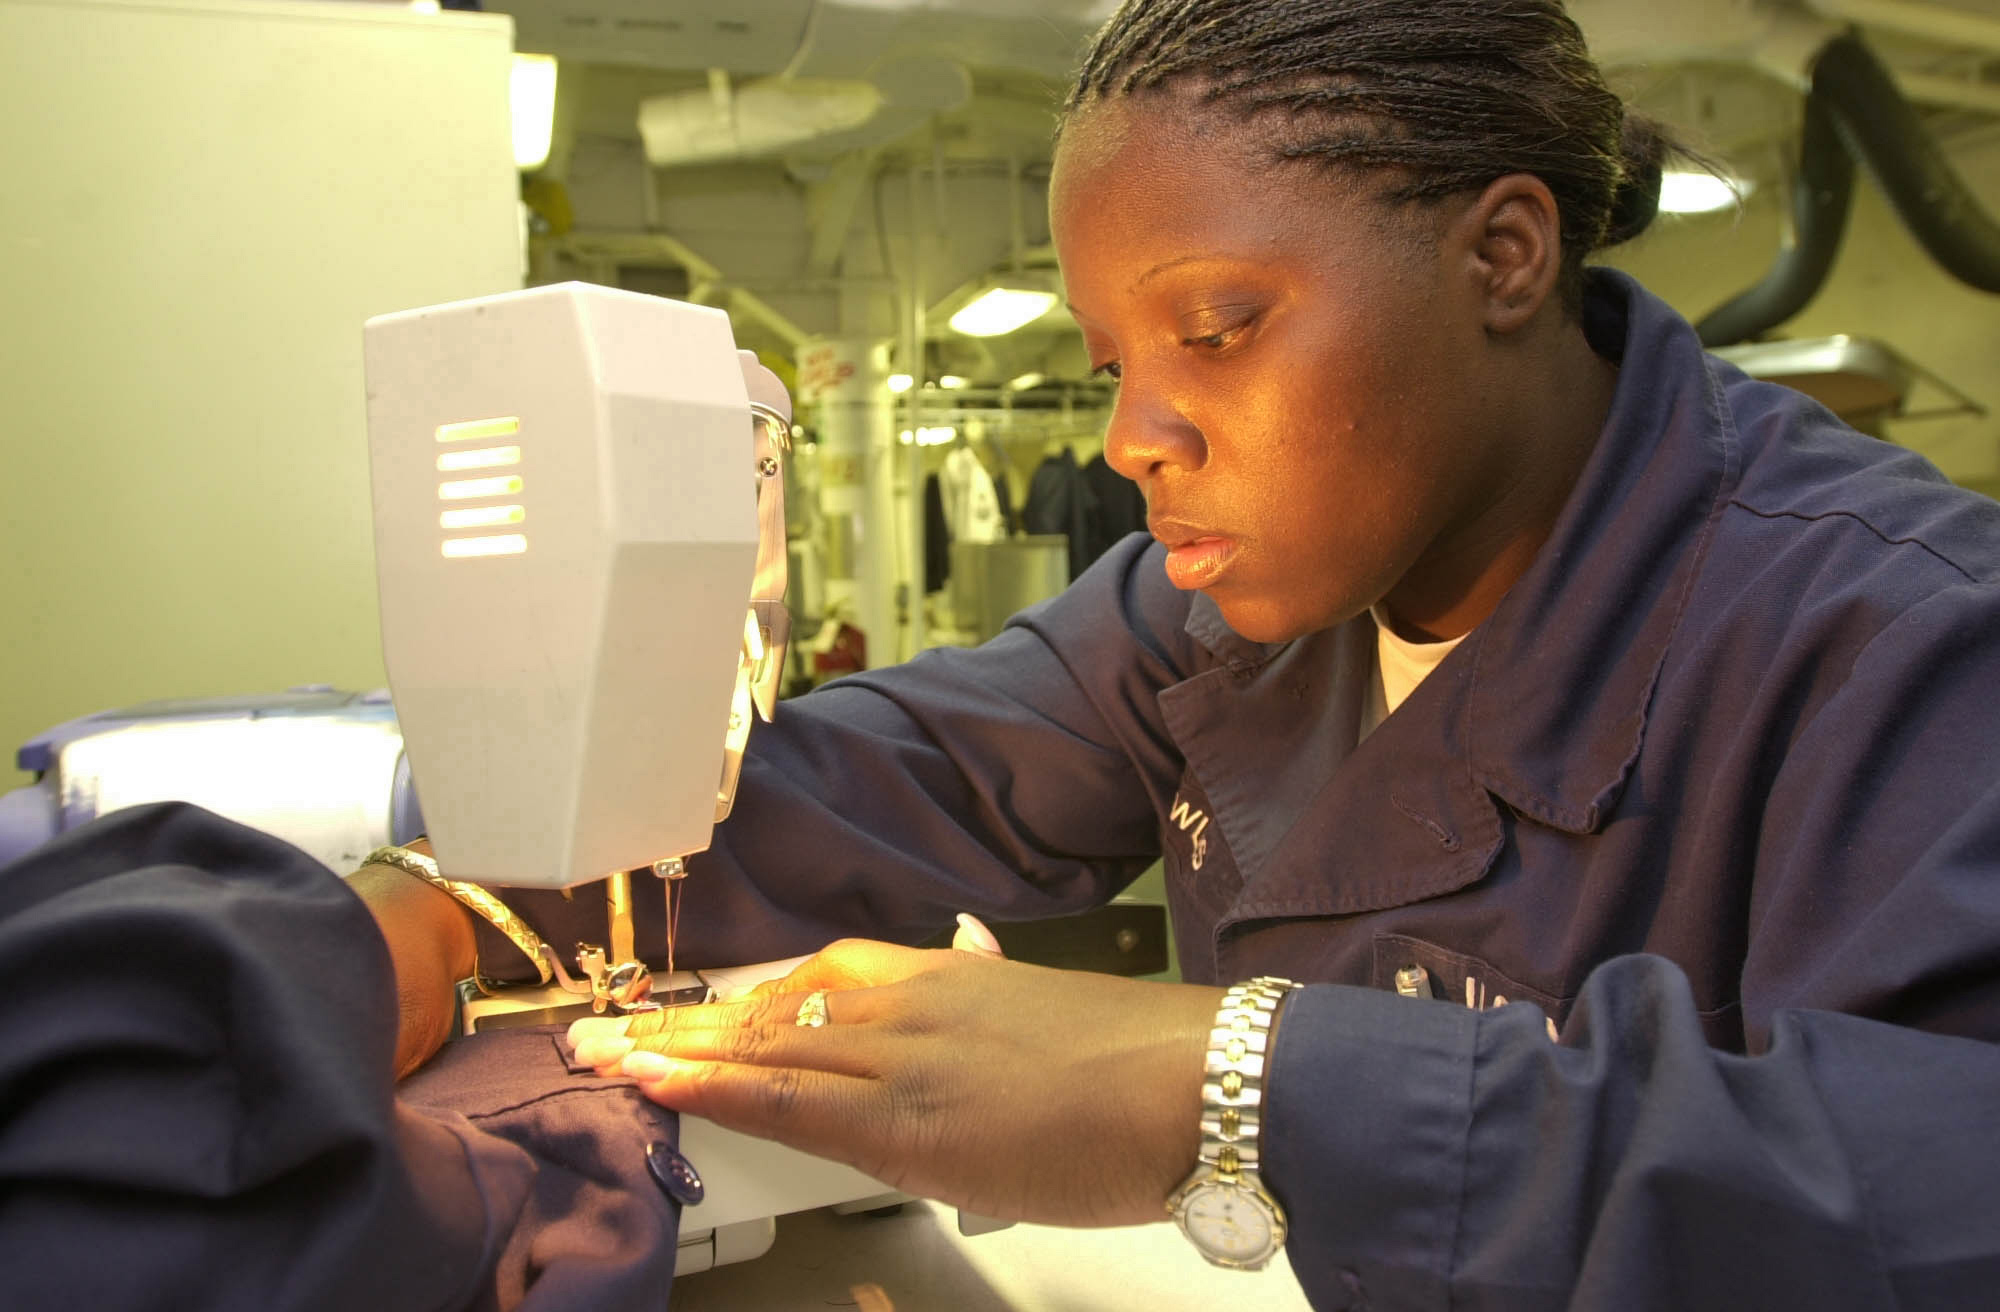 US Navy 020709-N-3567L-004 Ship's Serviceman Seaman sews patches on the coveralls of newly promoted sailors 